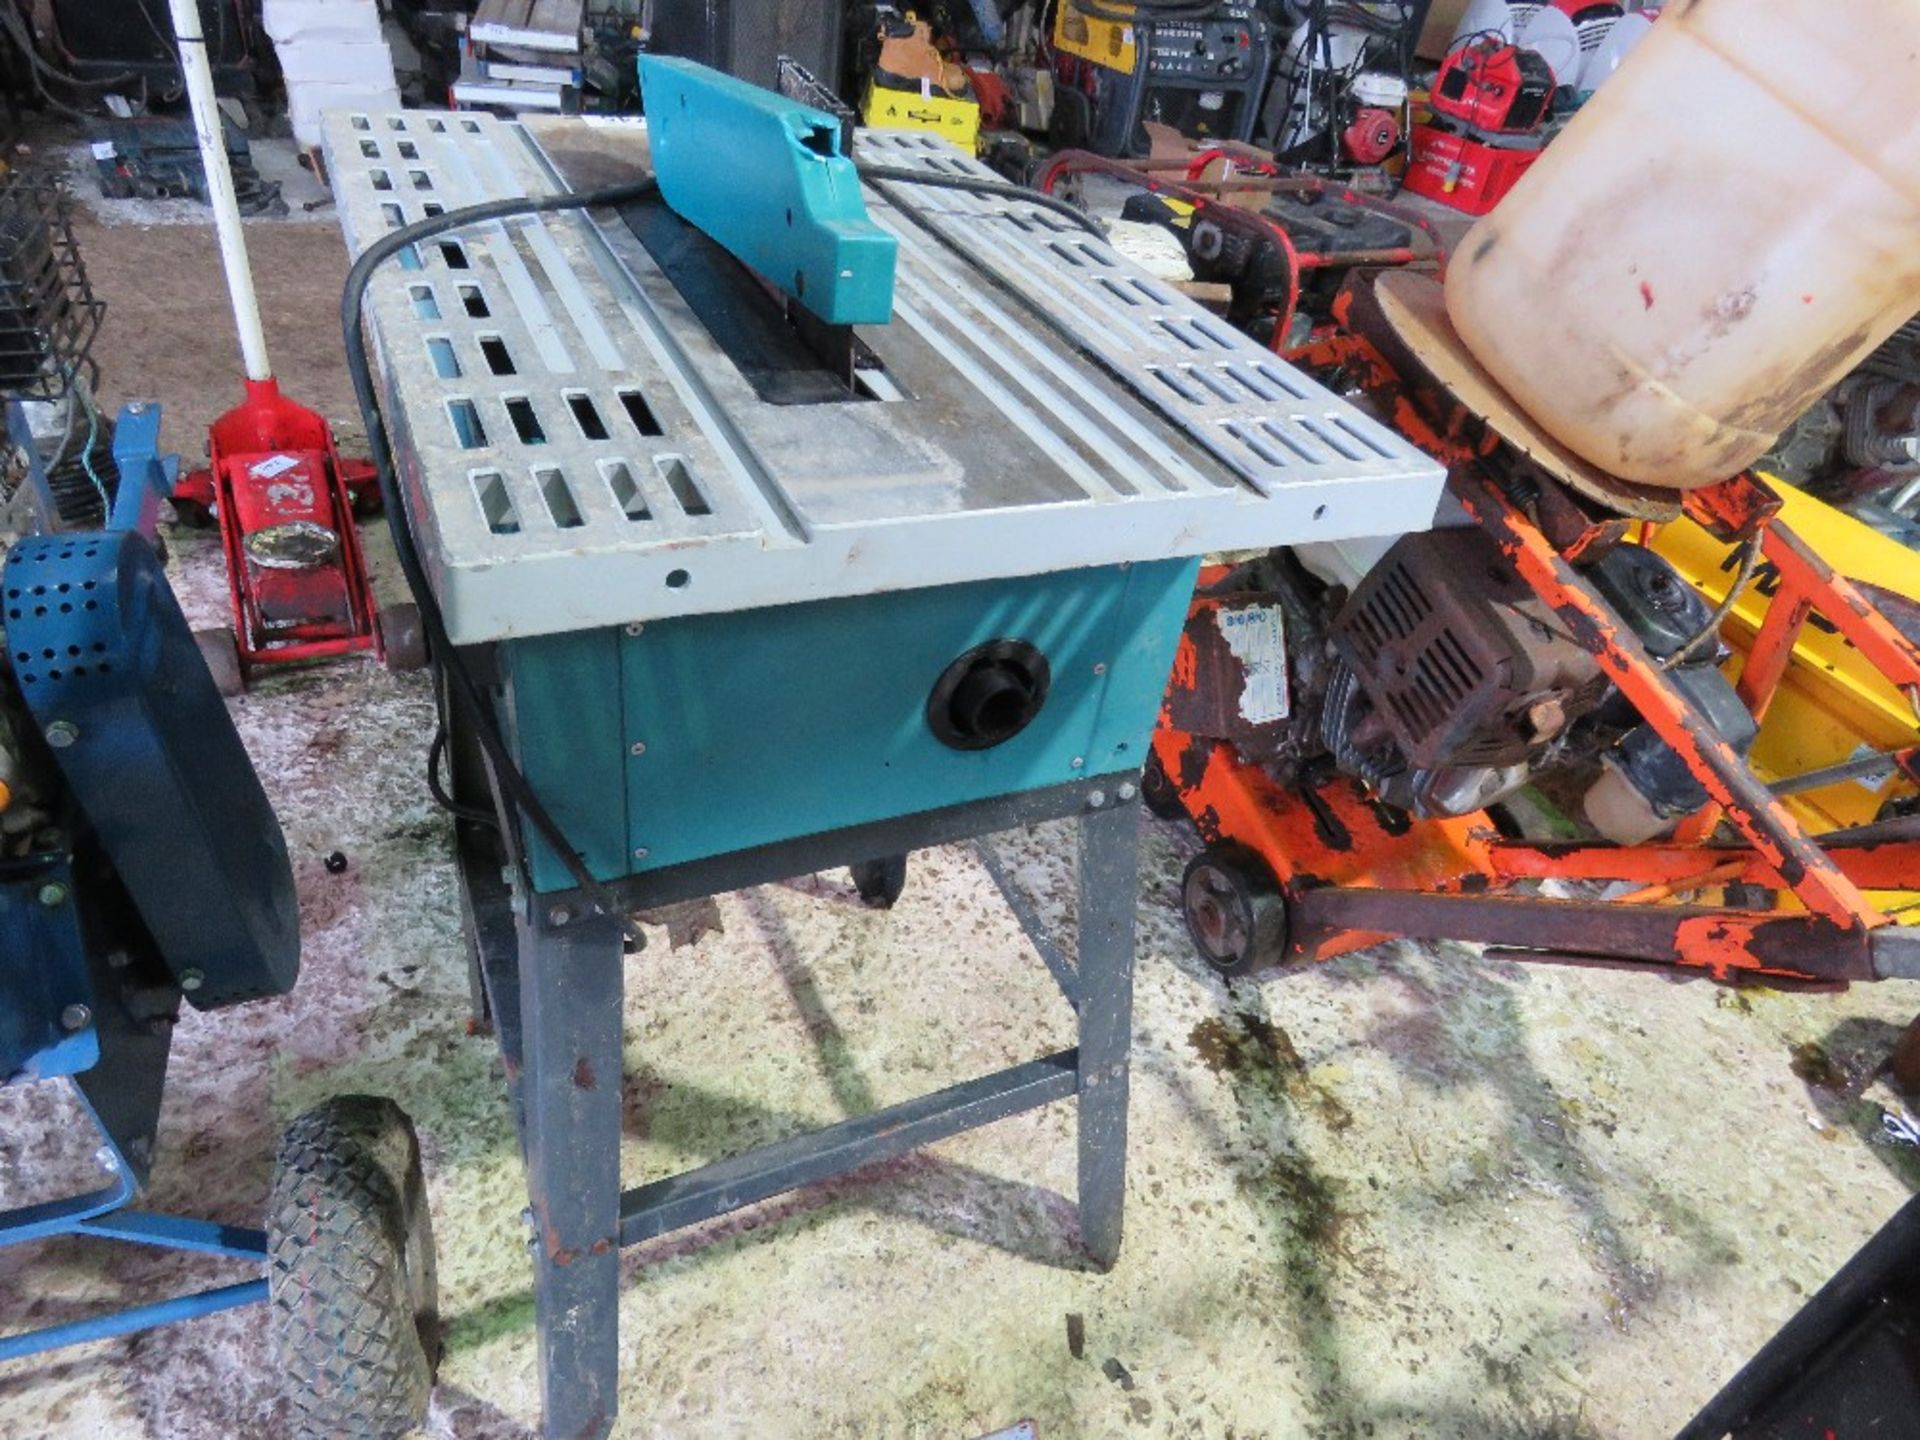 HOBBY SIZED WOOD CUTTING SAWBENCH, 240VOLT POWERED....SOURCED FROM DEPOT CLOSURE. - Image 3 of 4